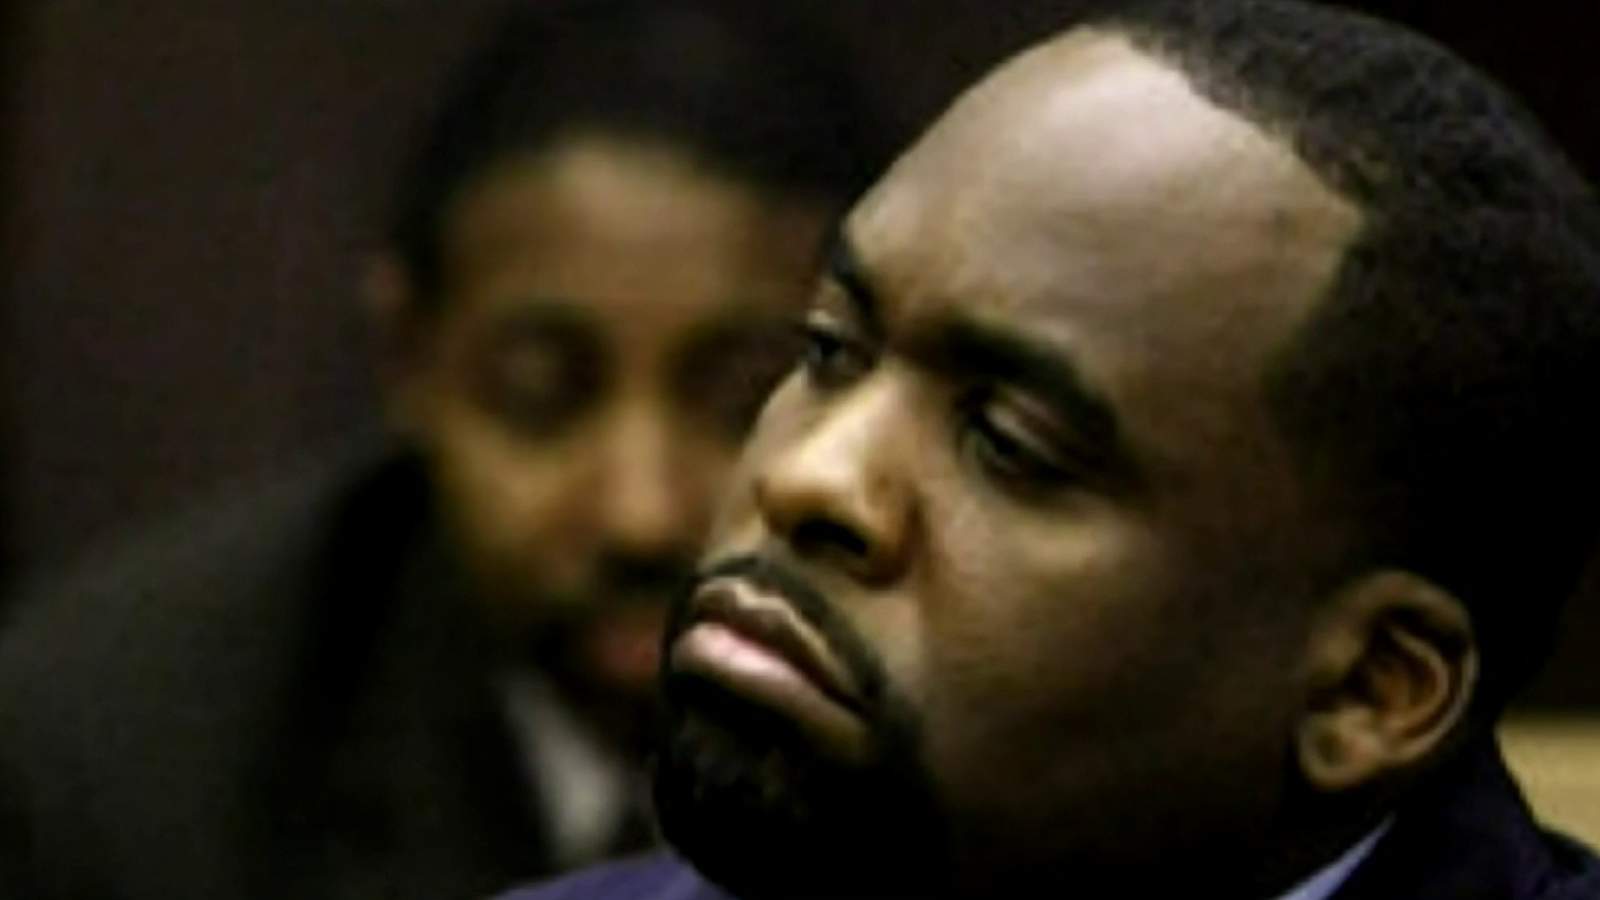 Nightside Report Jan. 26, 2021: Kwame Kilpatrick’s release brings back painful memories for former Detroit assistant chief, Pizza delivery driver says he was robbed, beaten in Lincoln Park